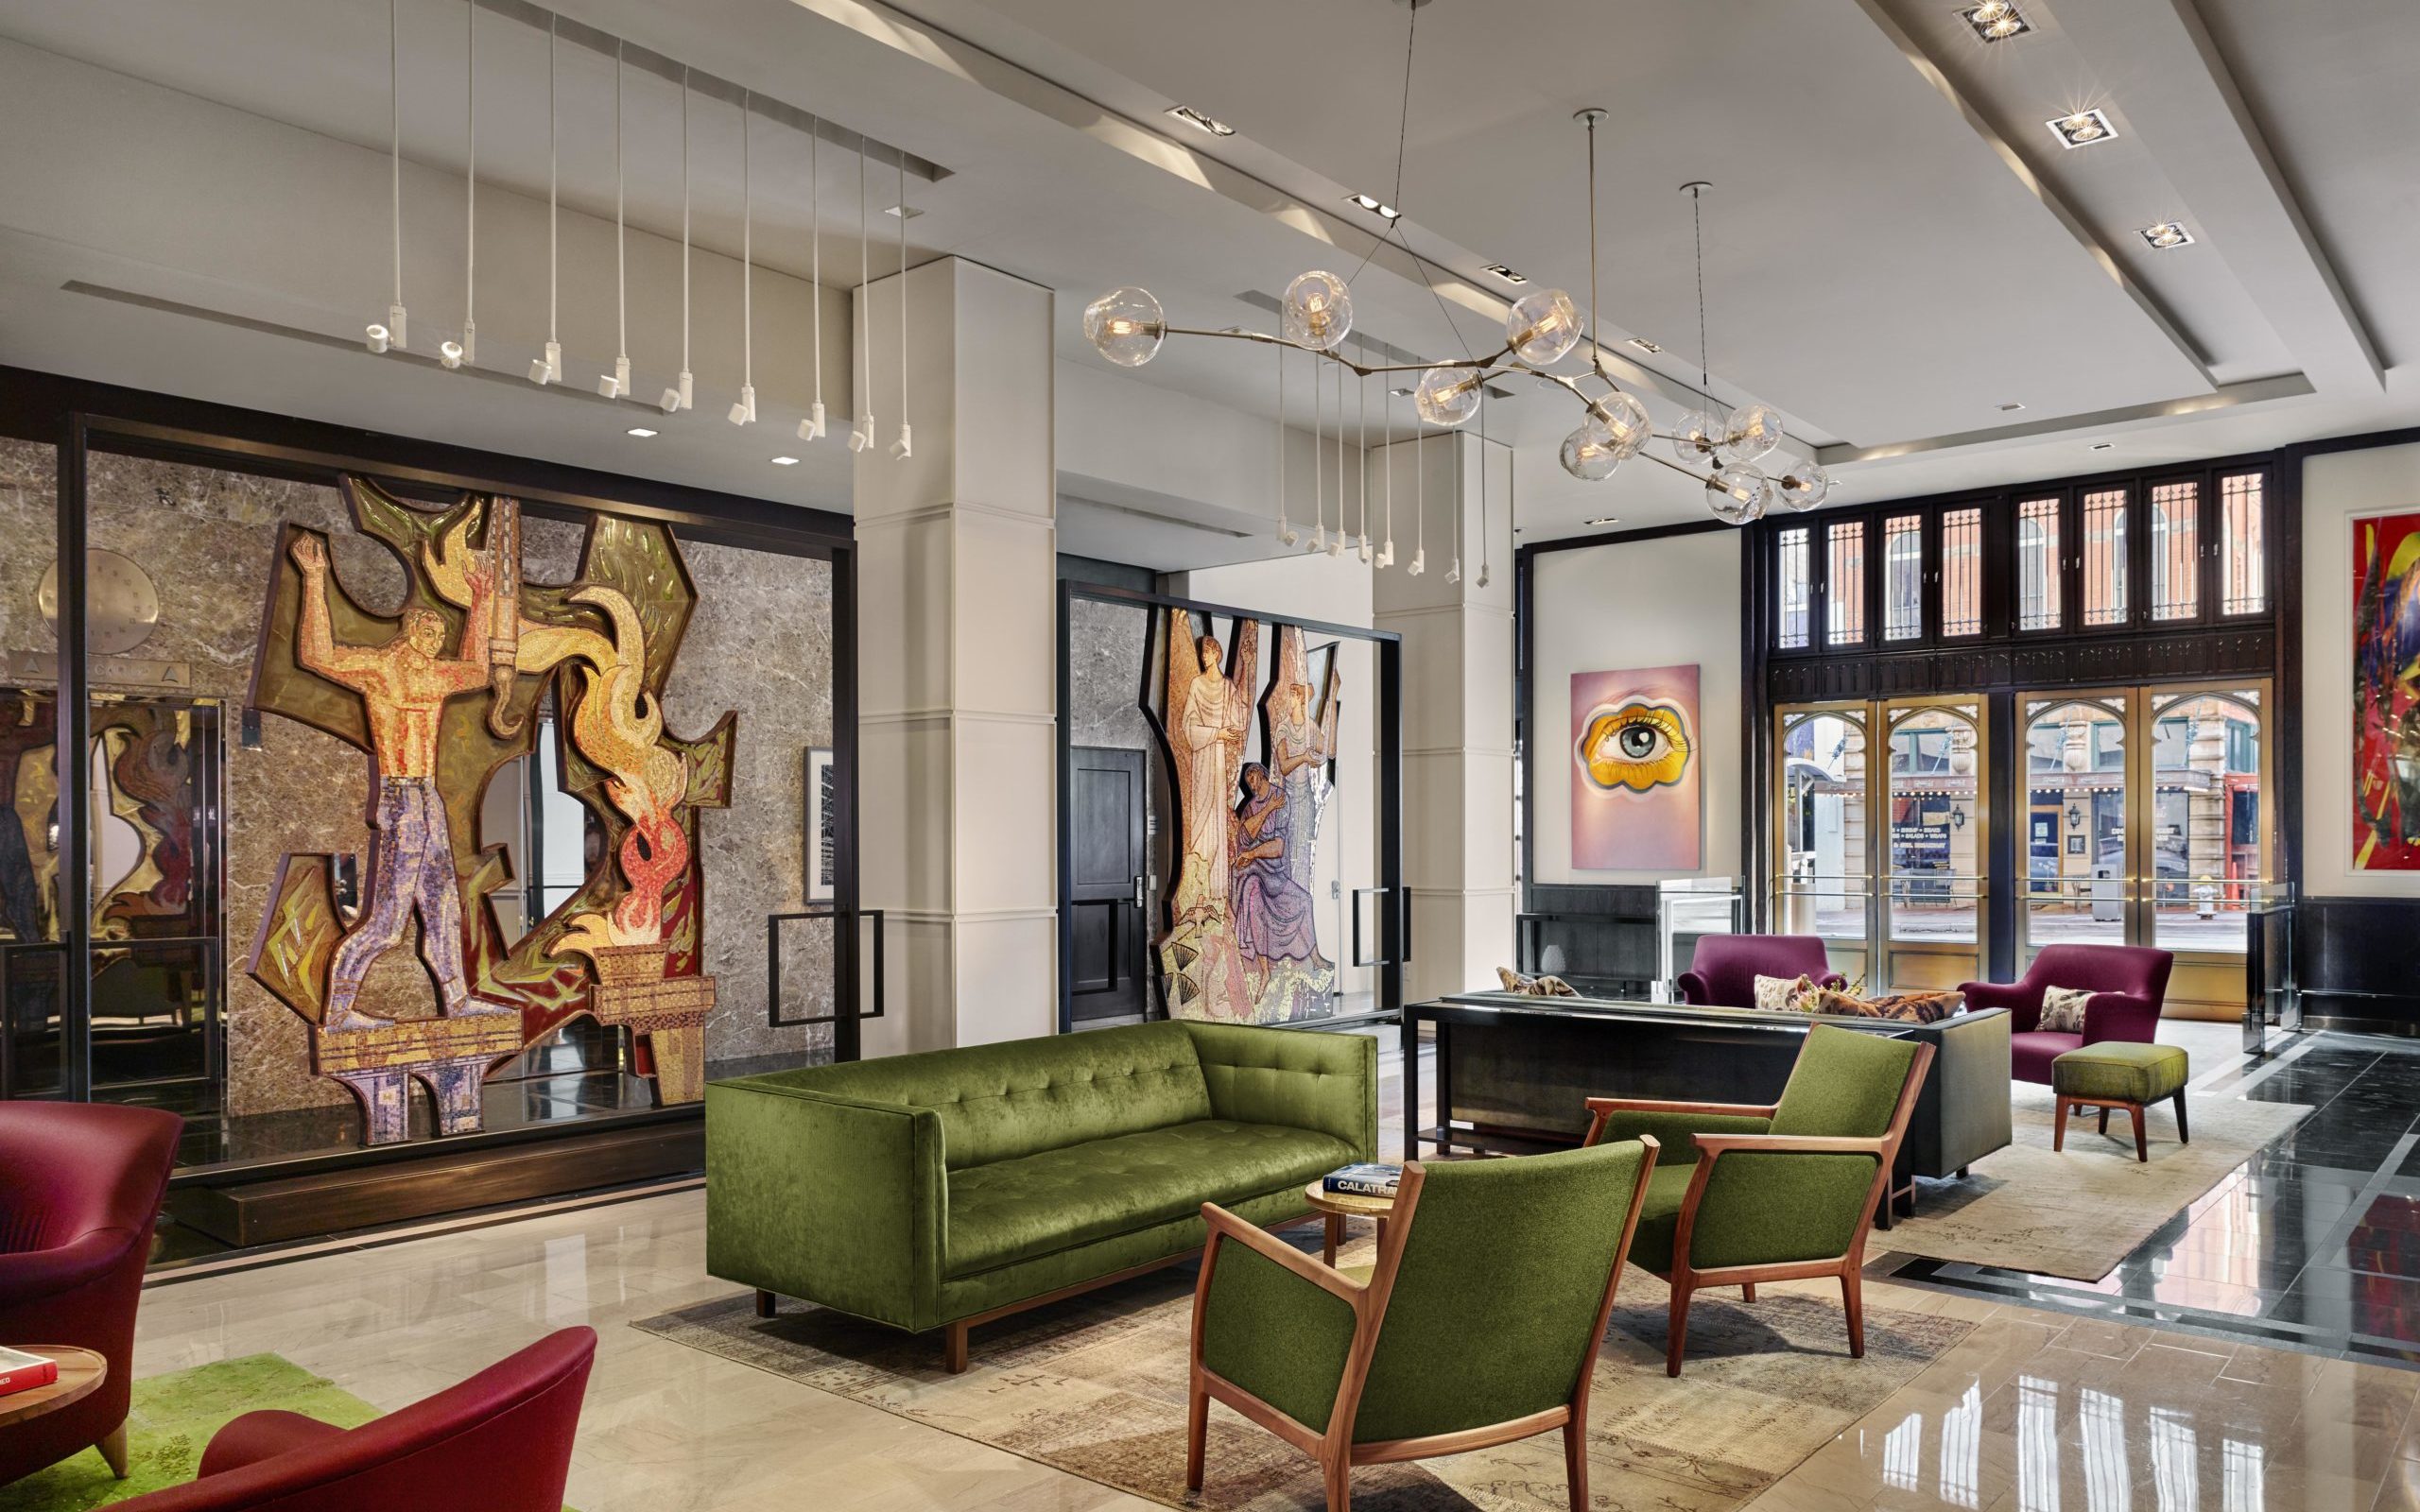 The Joule Dallas Is A Perfect Getaway For Art-Lovers and Foodies Alike